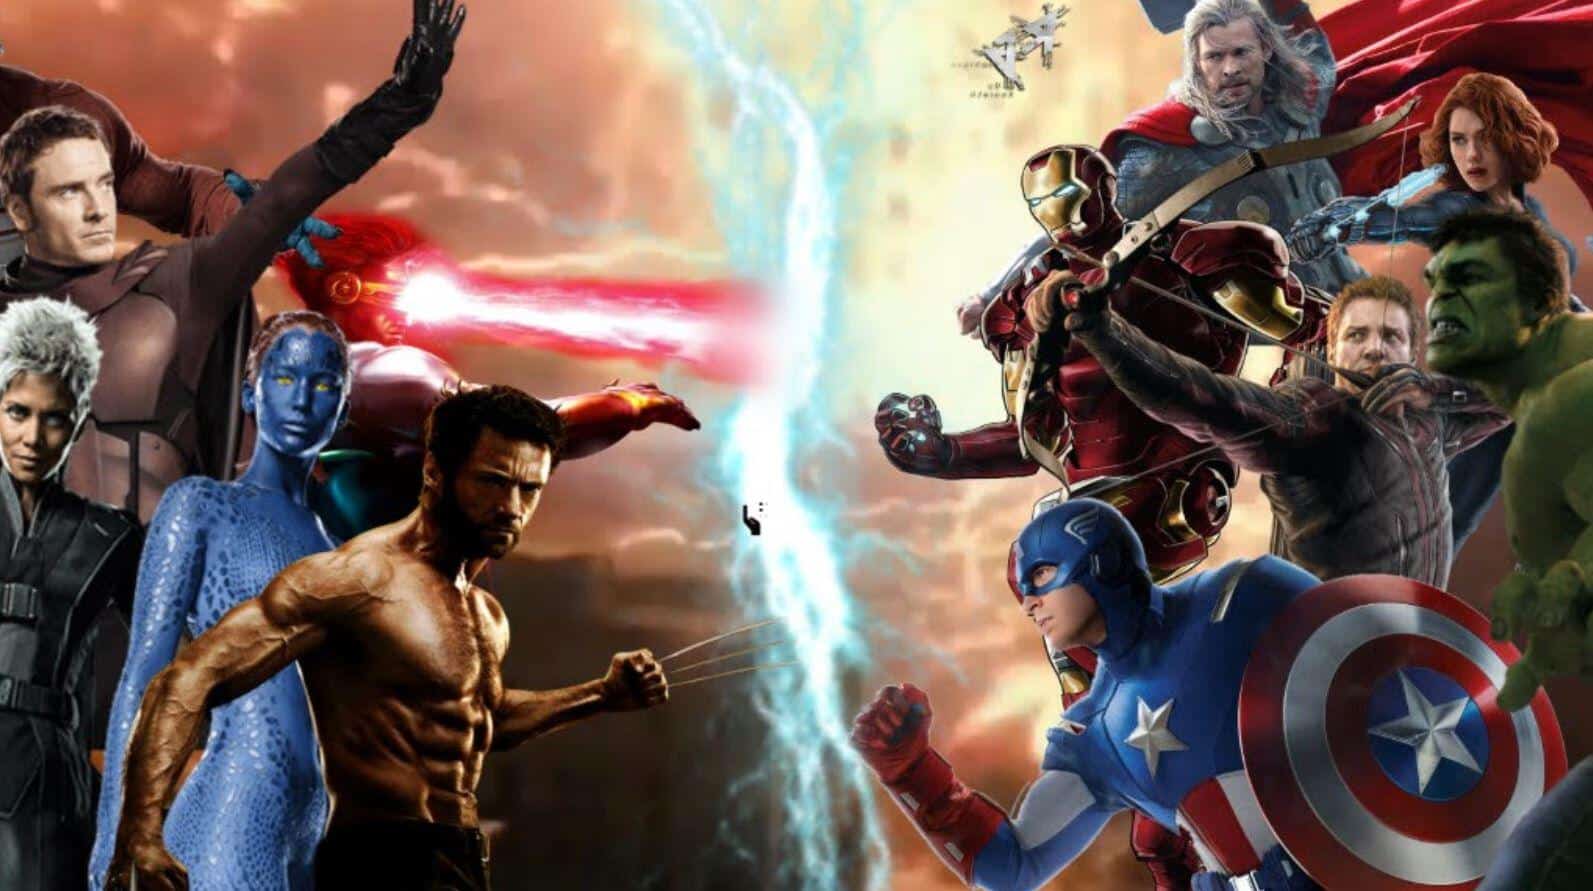 A massive 'Avengers 5' crossover movie with X-Men is already in